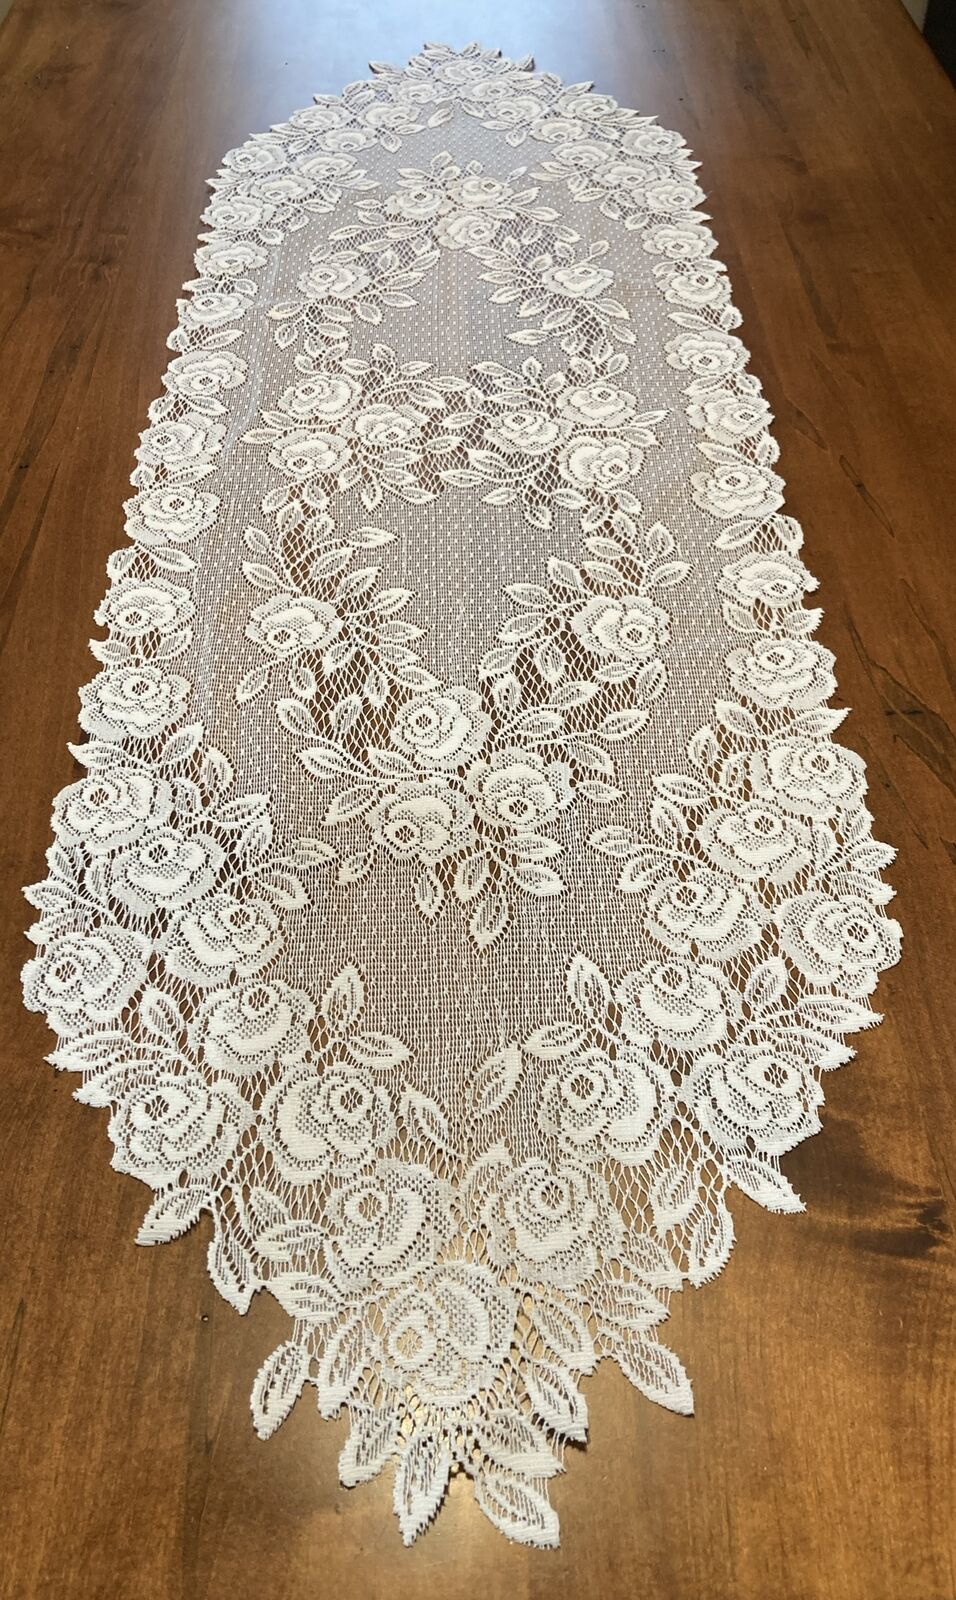 Collectable Heritage Lace 46 Inch Table Runner With Roses Very Elegant